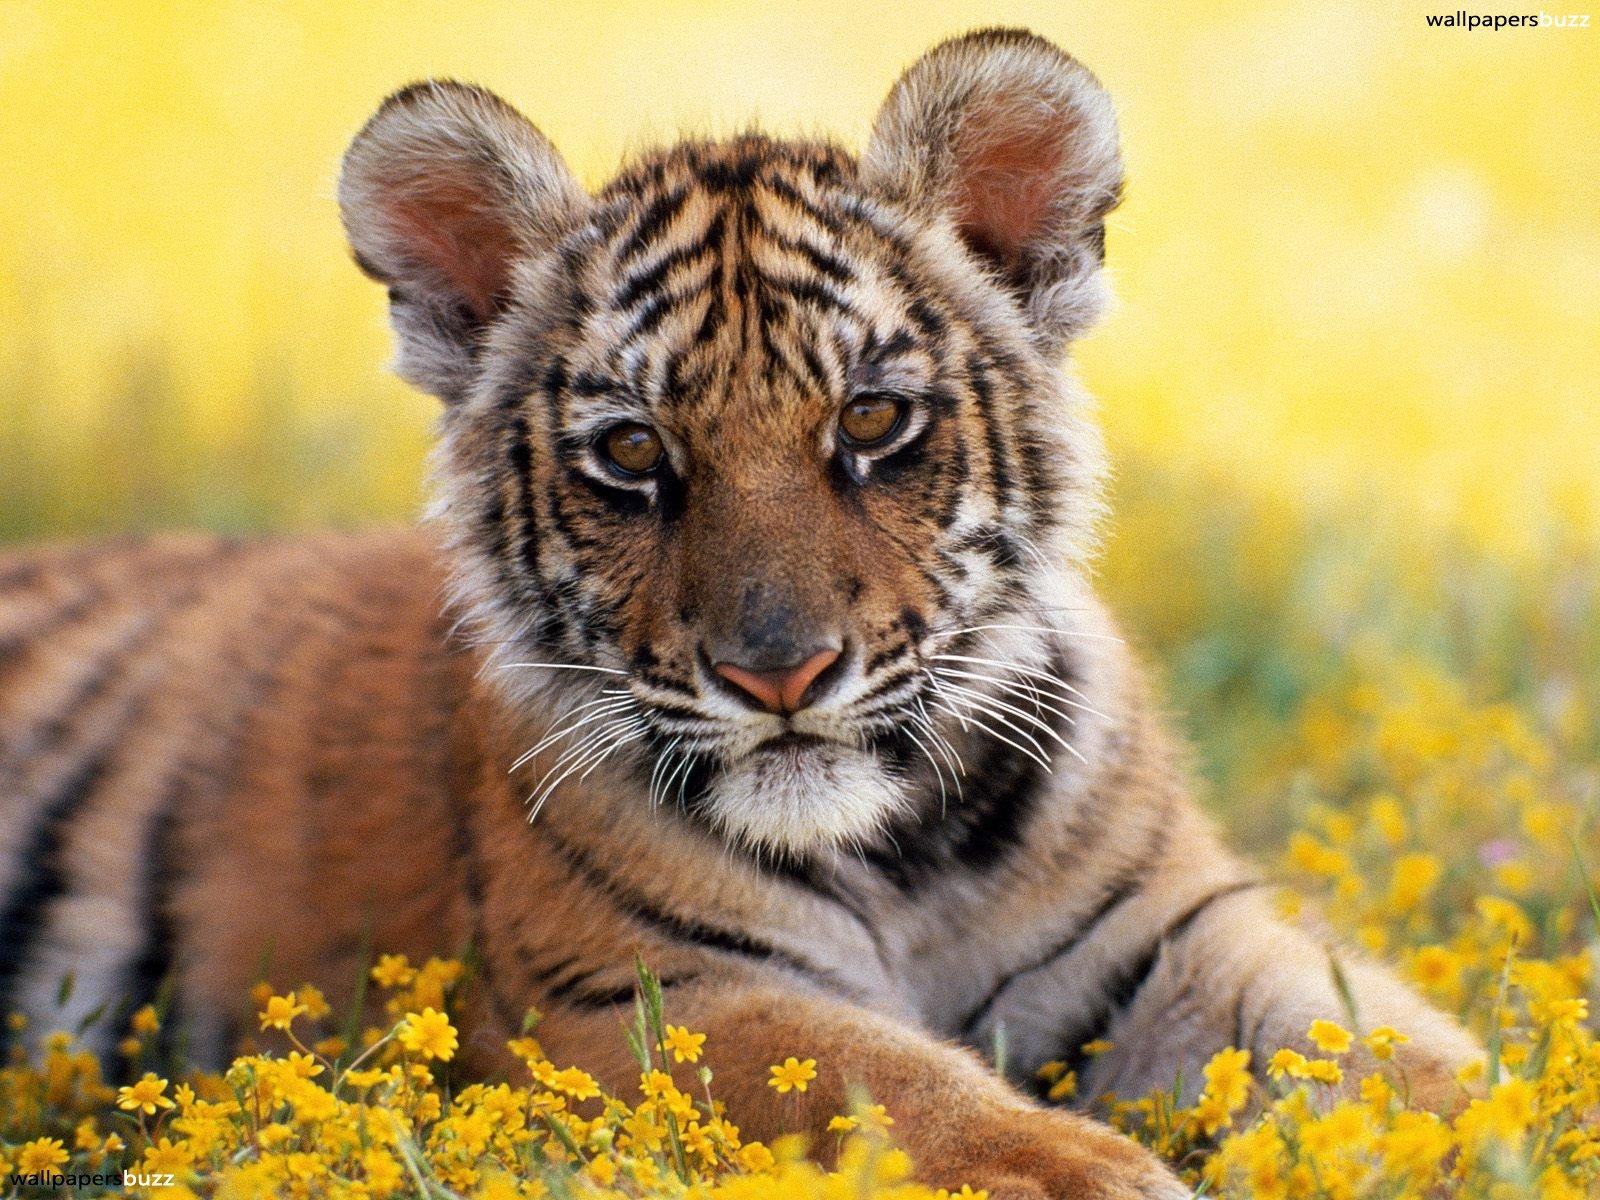 Baby Tigers tigers Photo